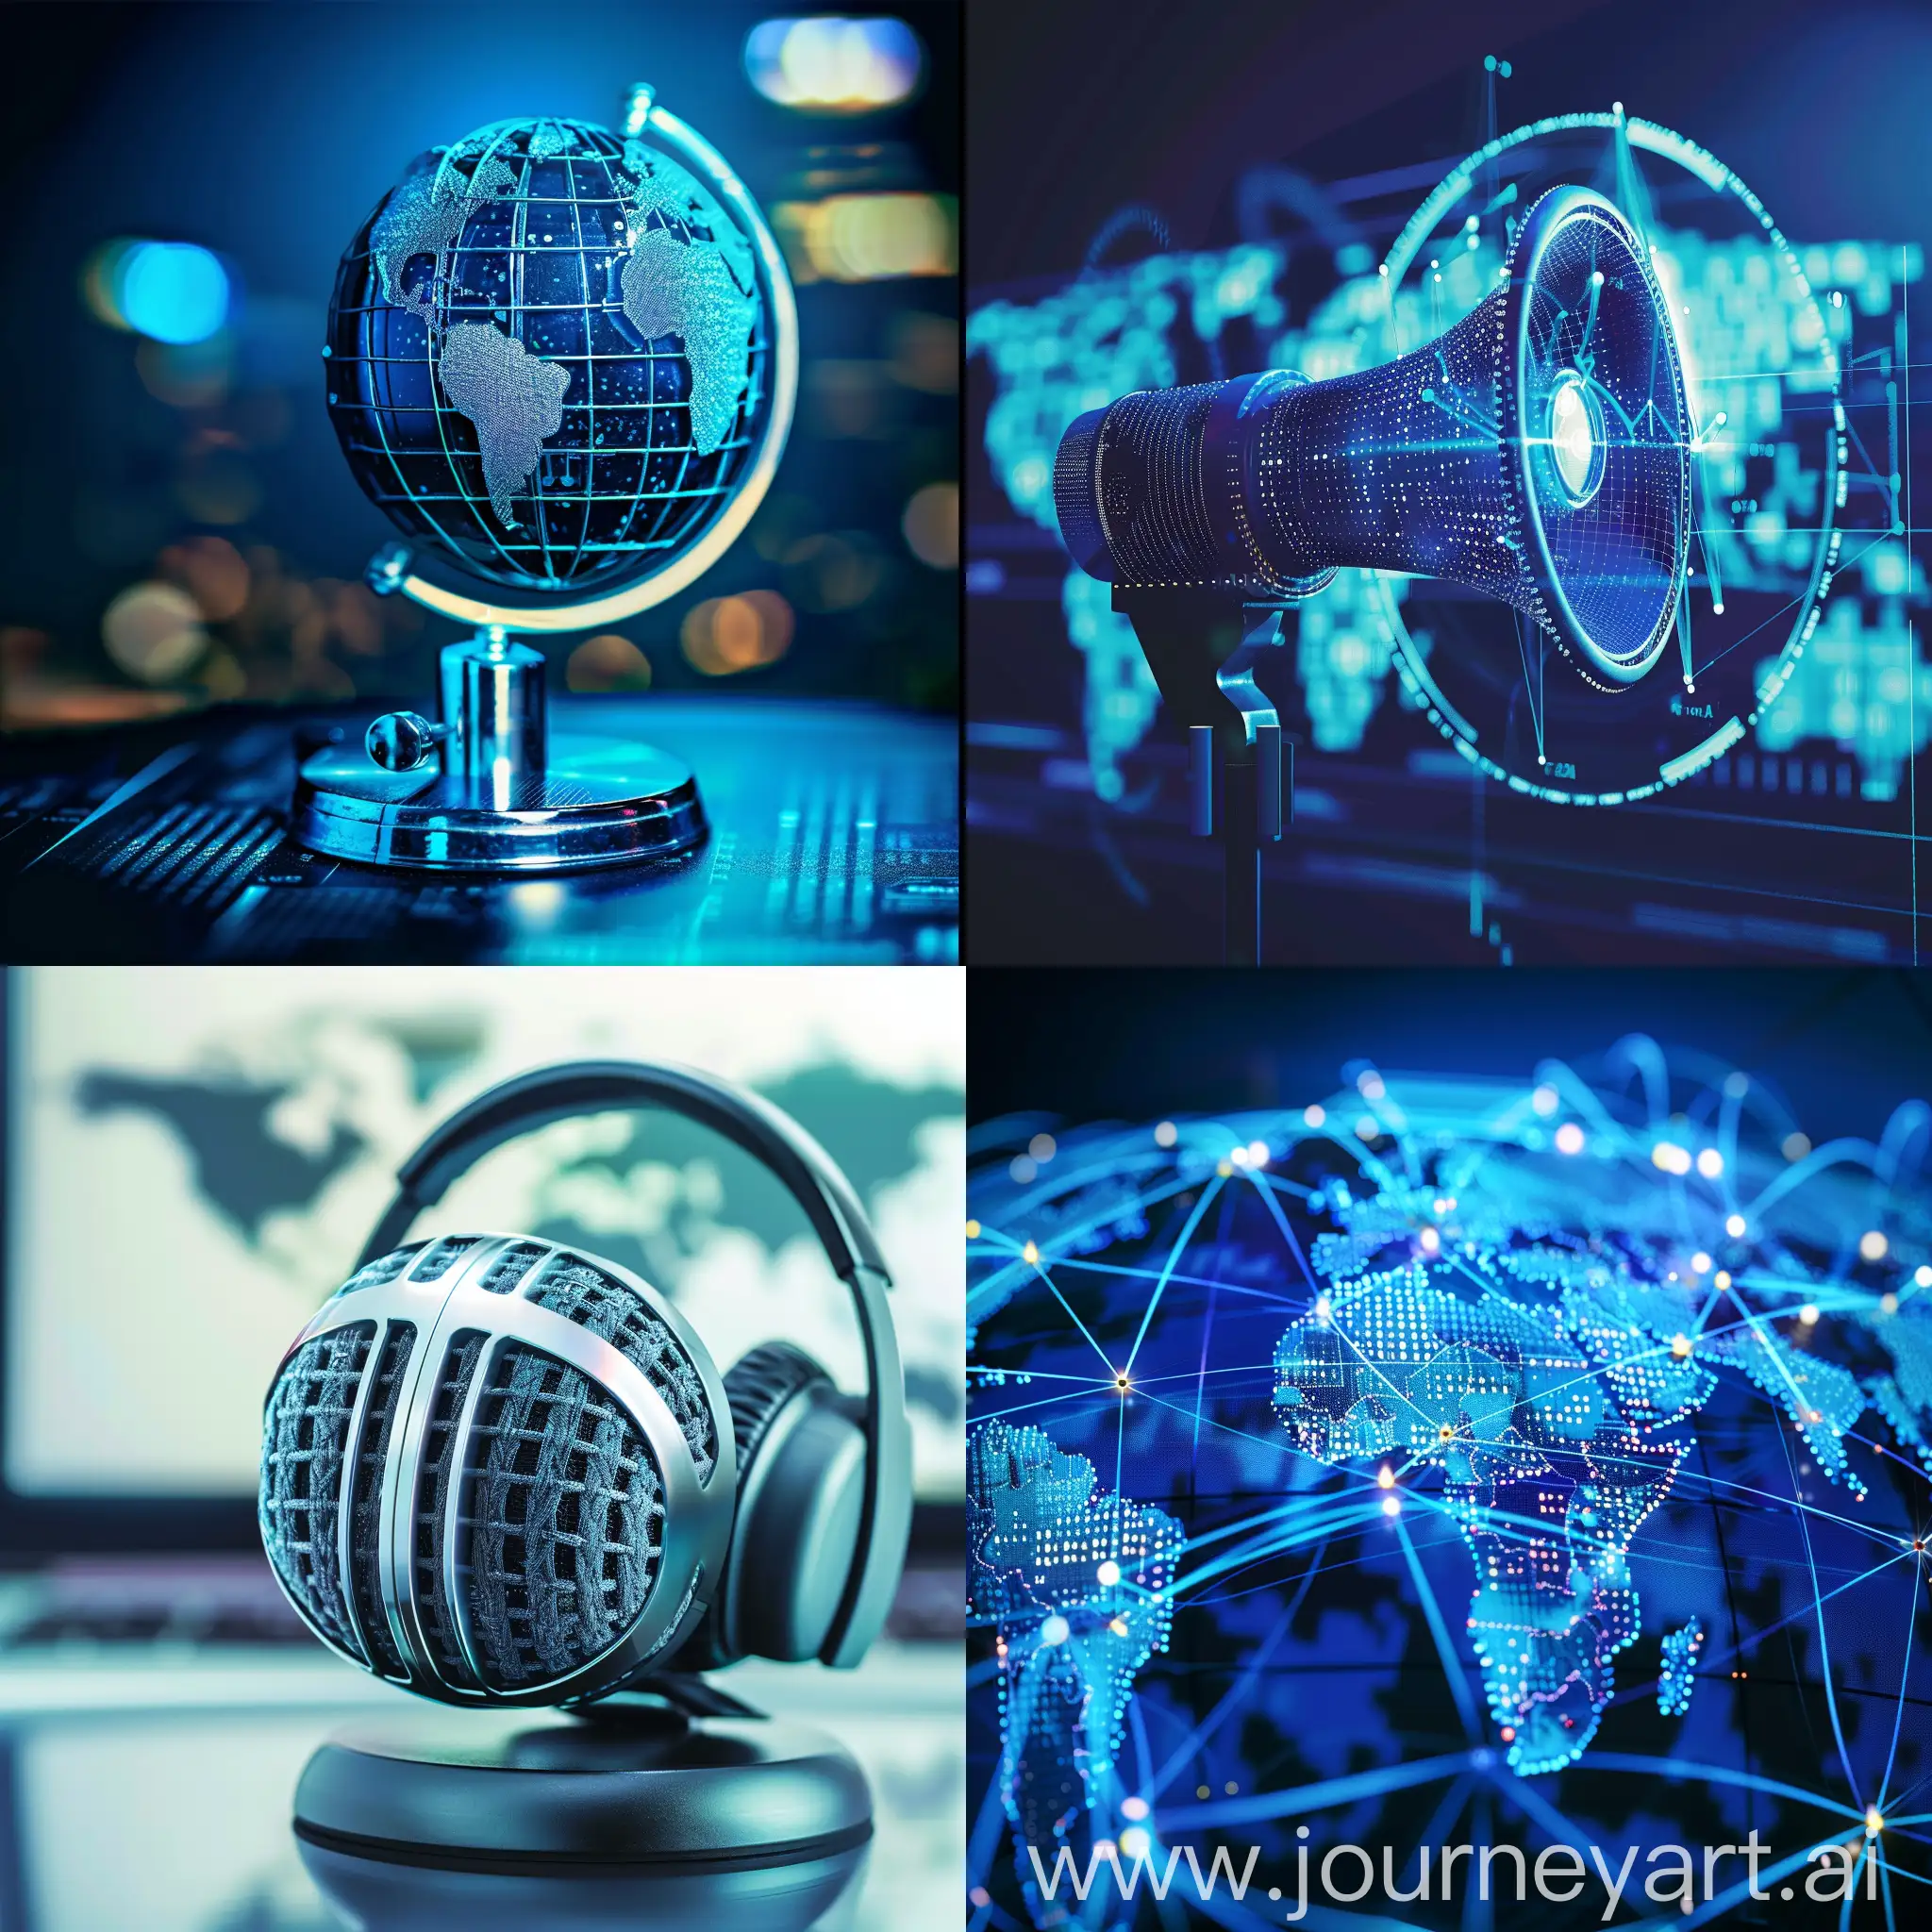 Global-Audio-and-Video-Solutions-Protecting-Customer-Interests-Worldwide